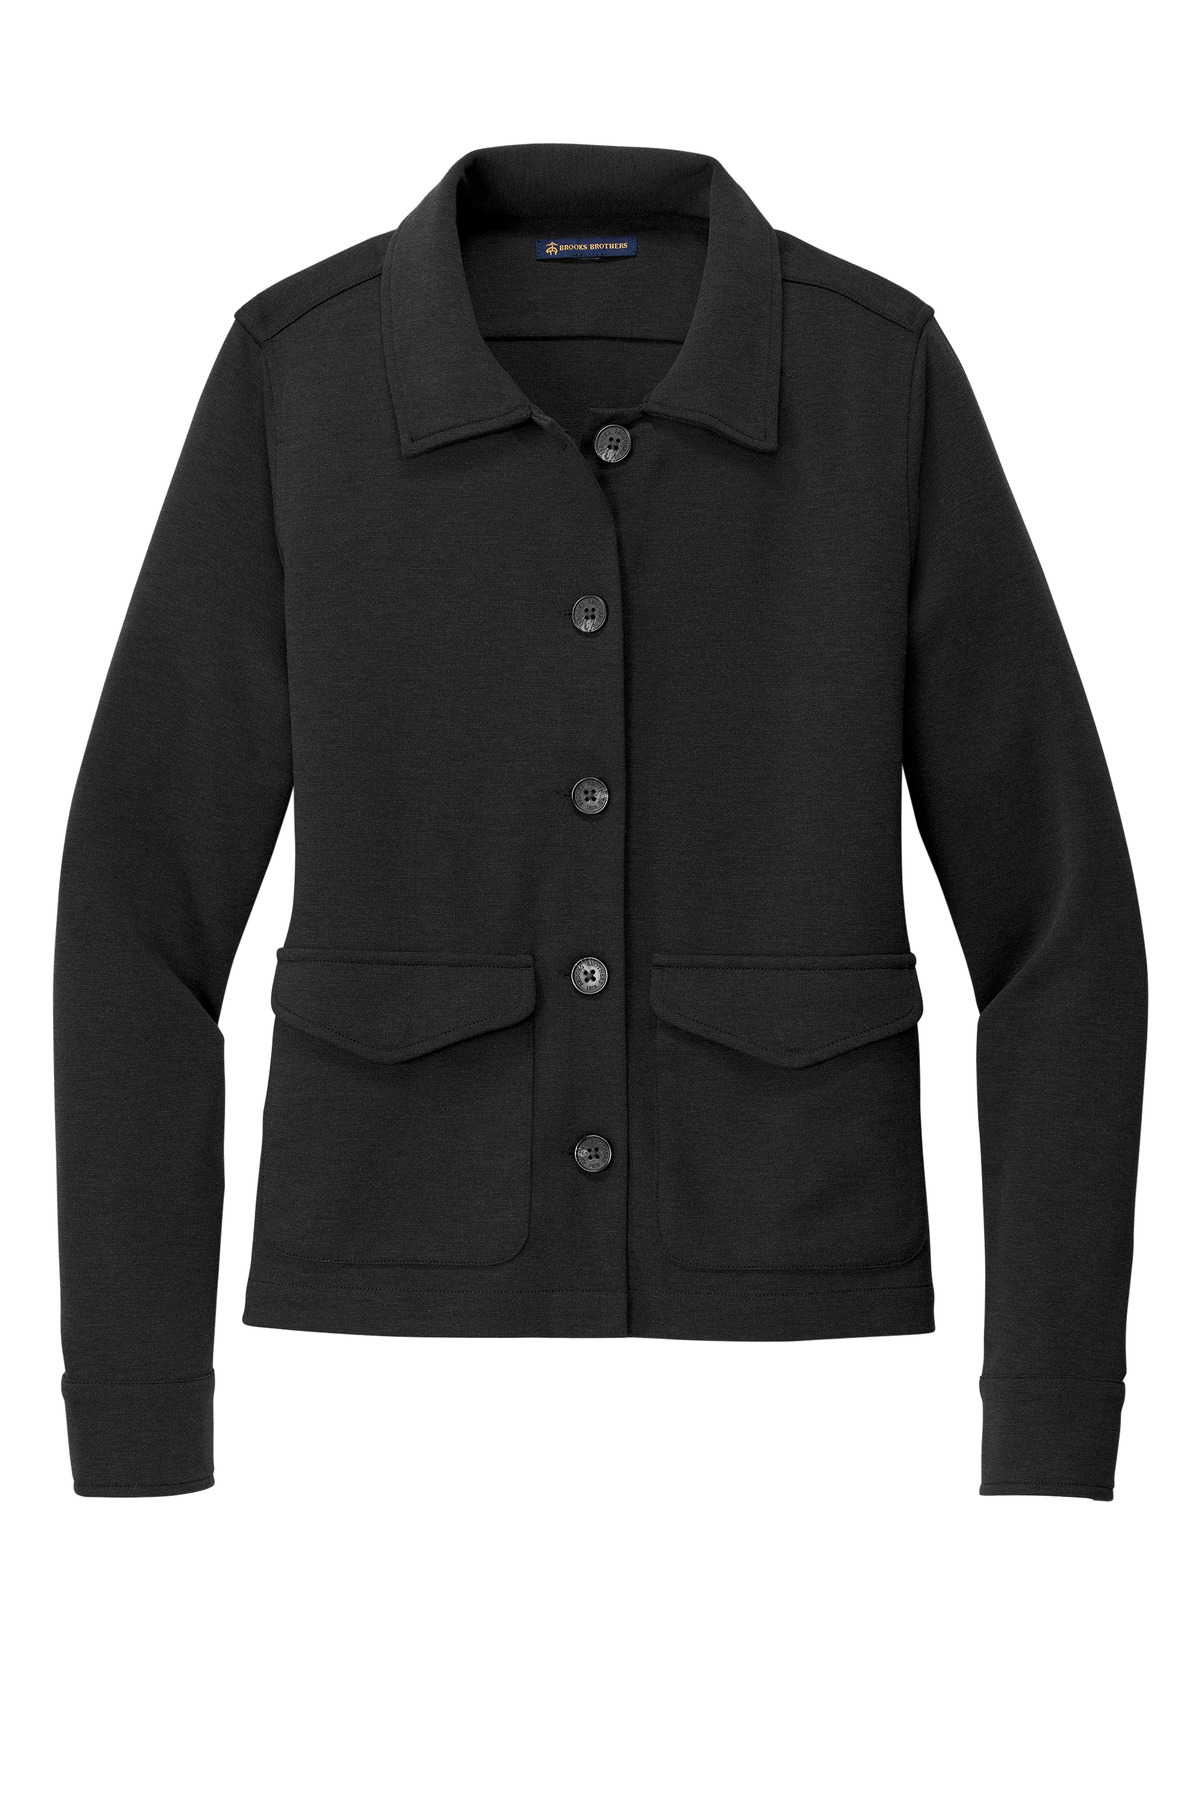 Brooks Brothers Womens Mid-Layer Stretch Button Jacket BB18205